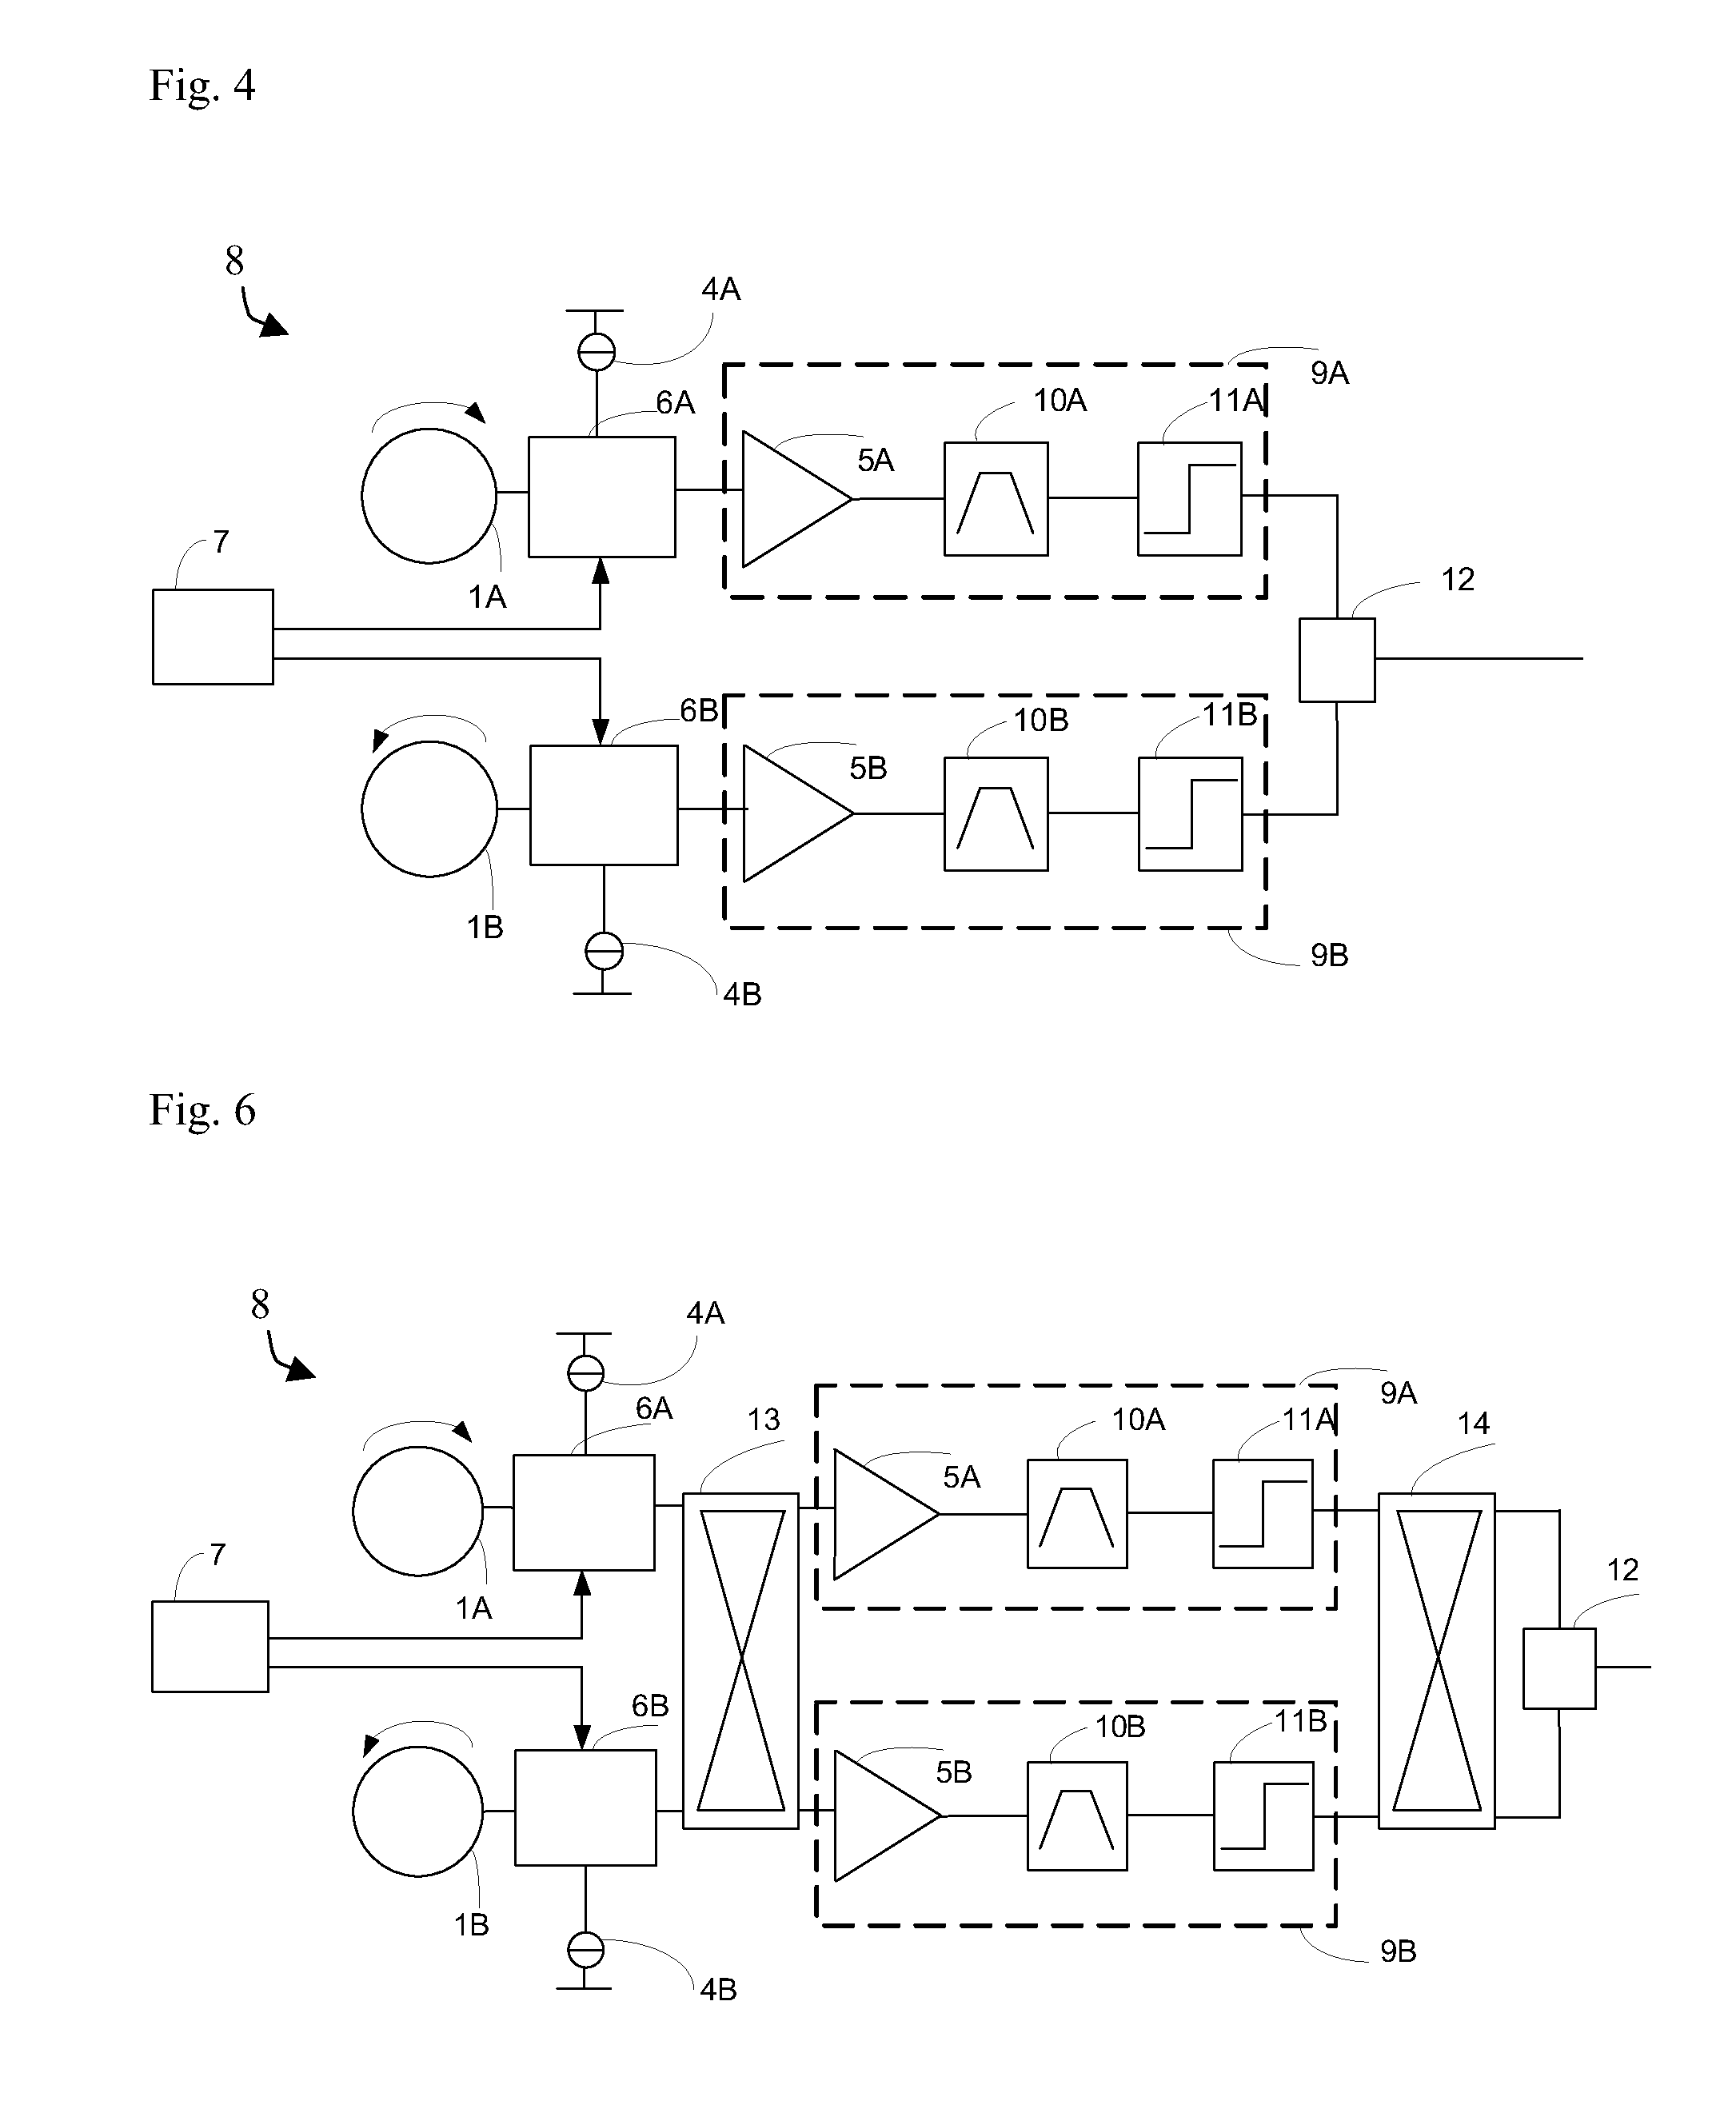 Magnetic field sensor measuring a direction of a magnetic field in a plane and current sensor